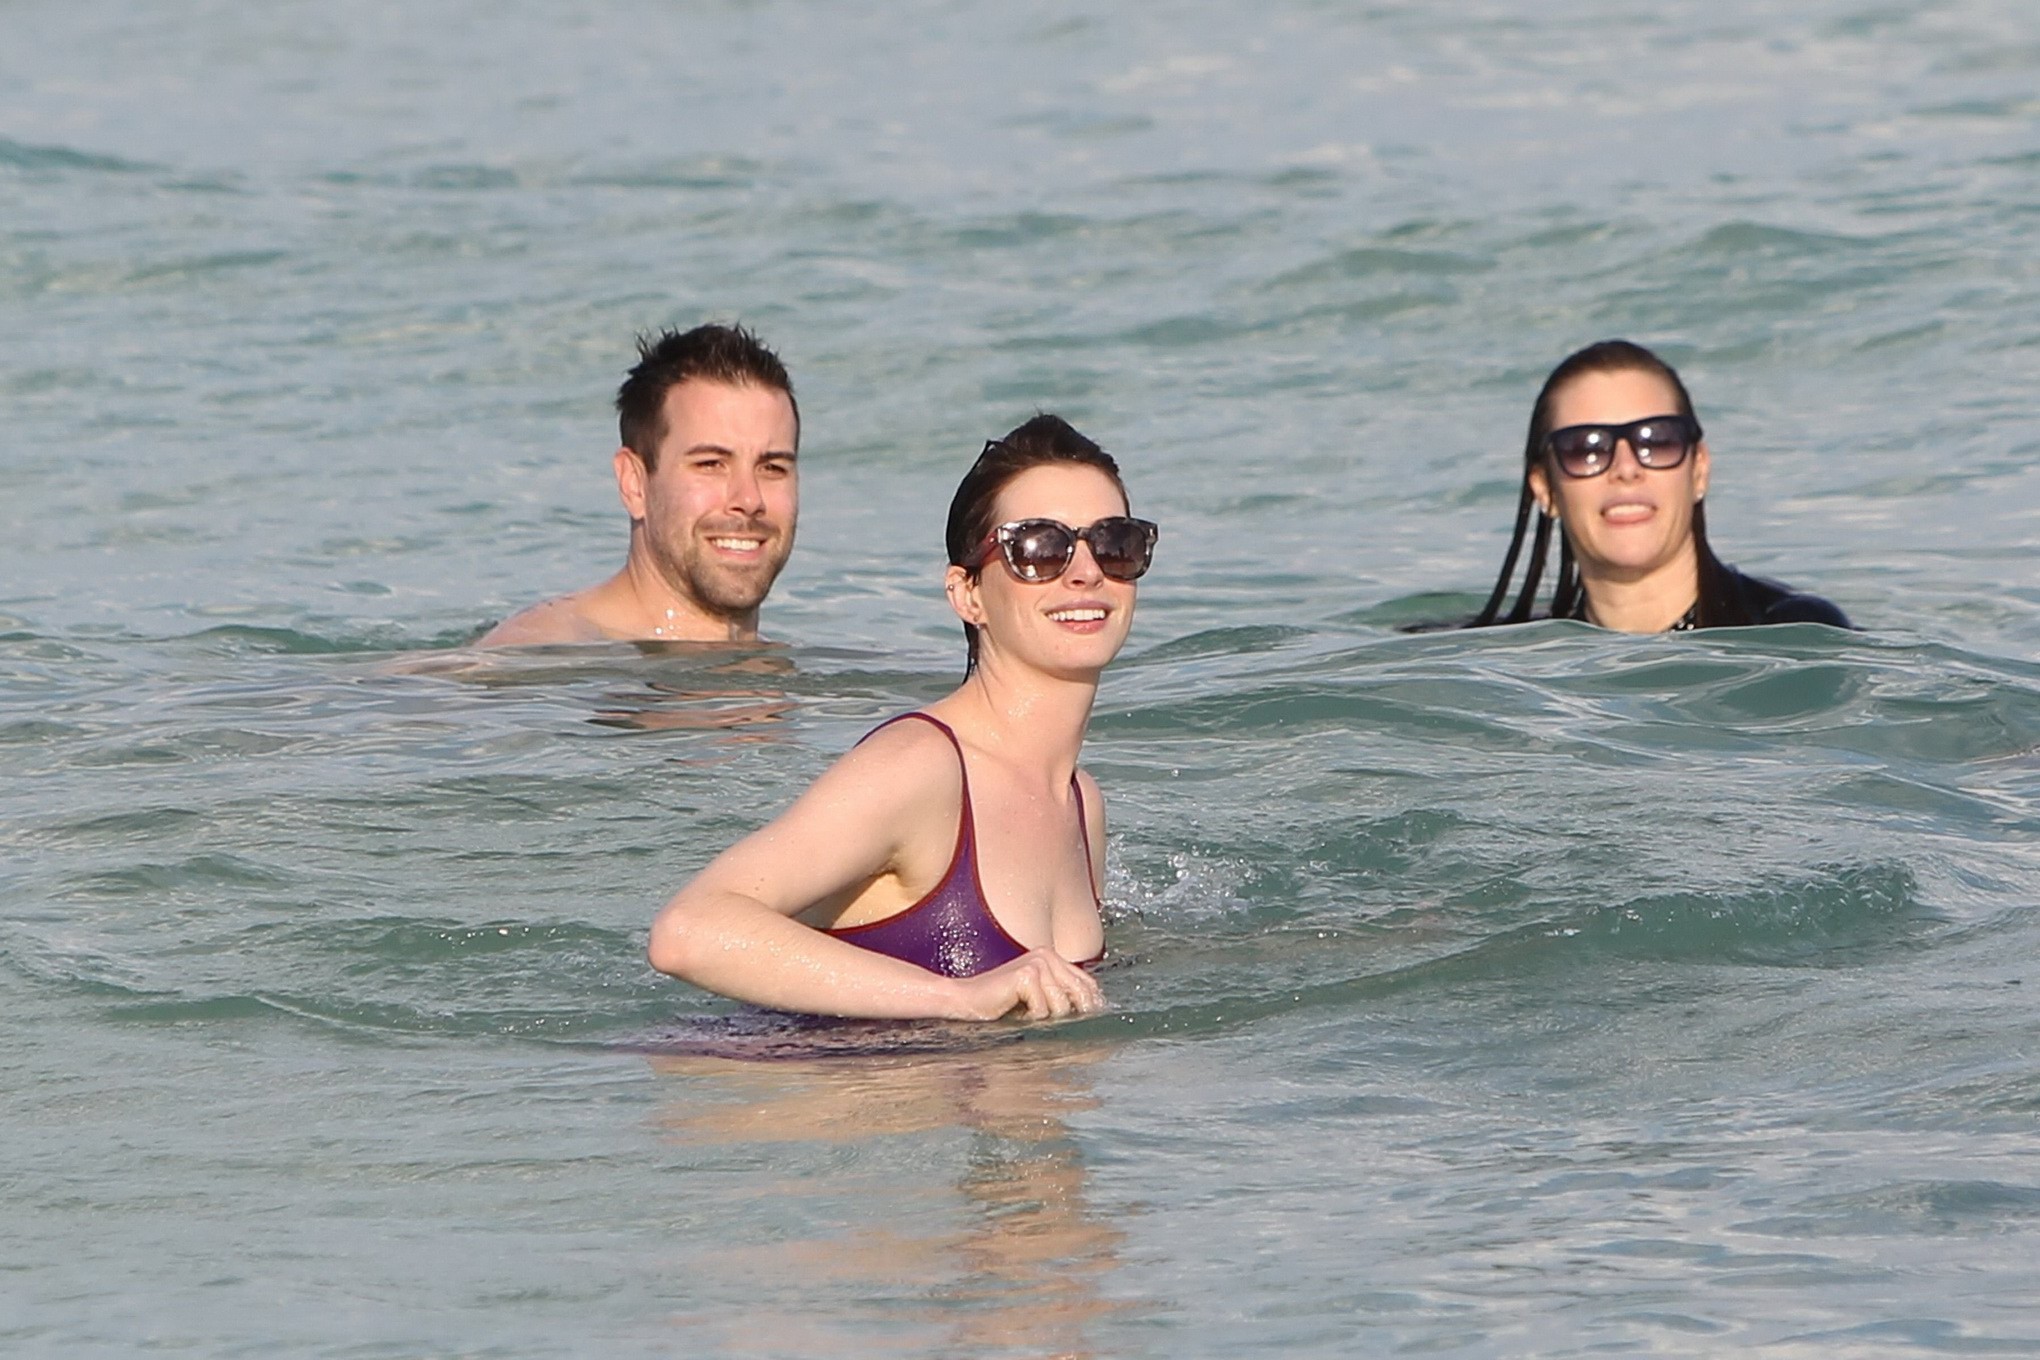 Anne Hathaway wearing wet purple see-through swimsuit and shorts at the beach in #75200948